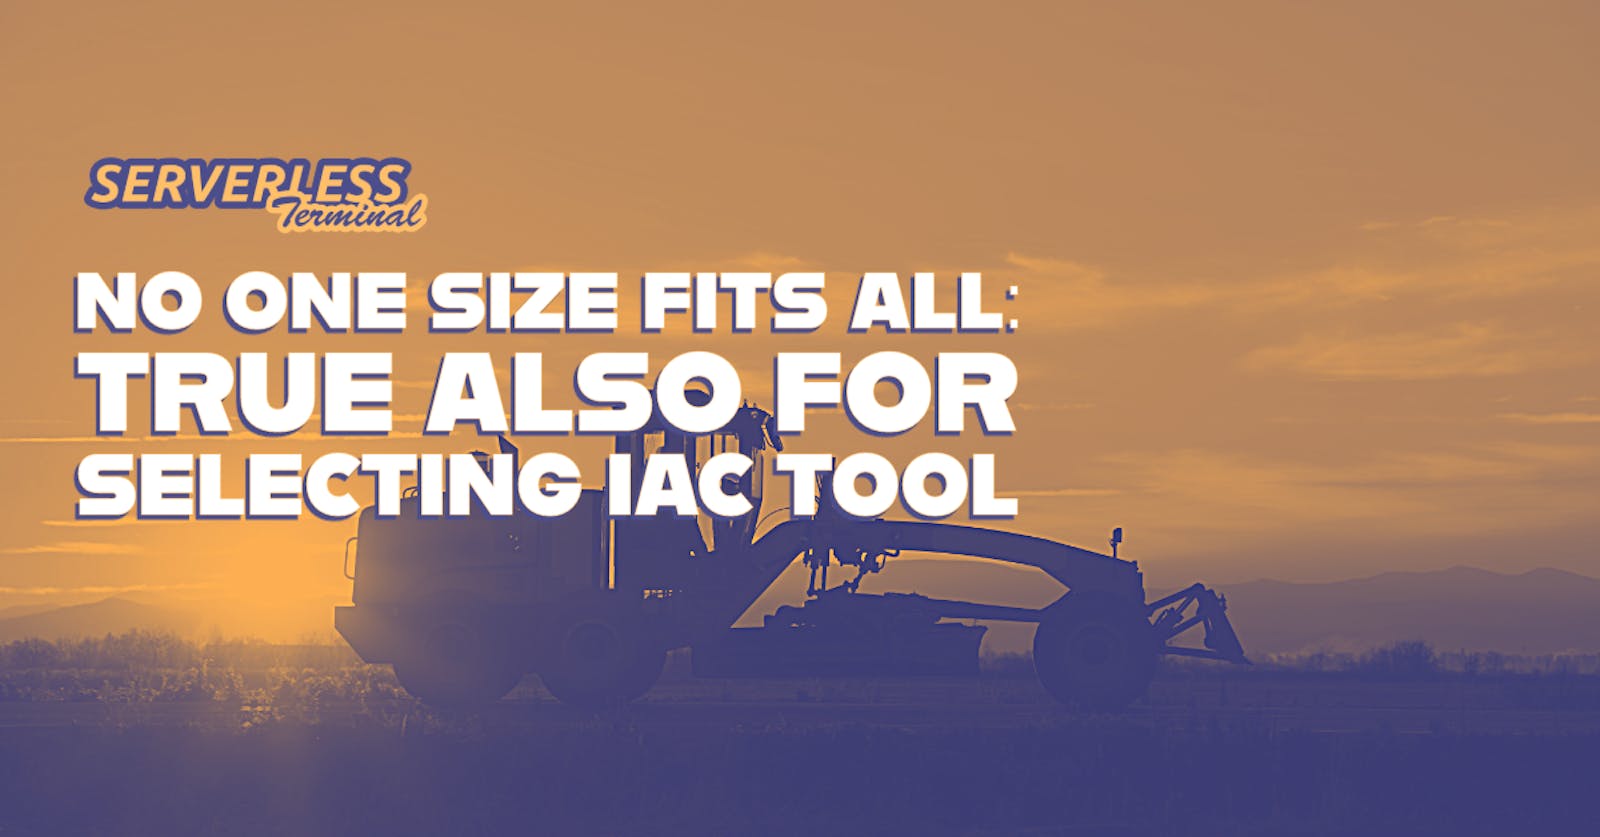 No one size fits all: True also for selecting IaC tool